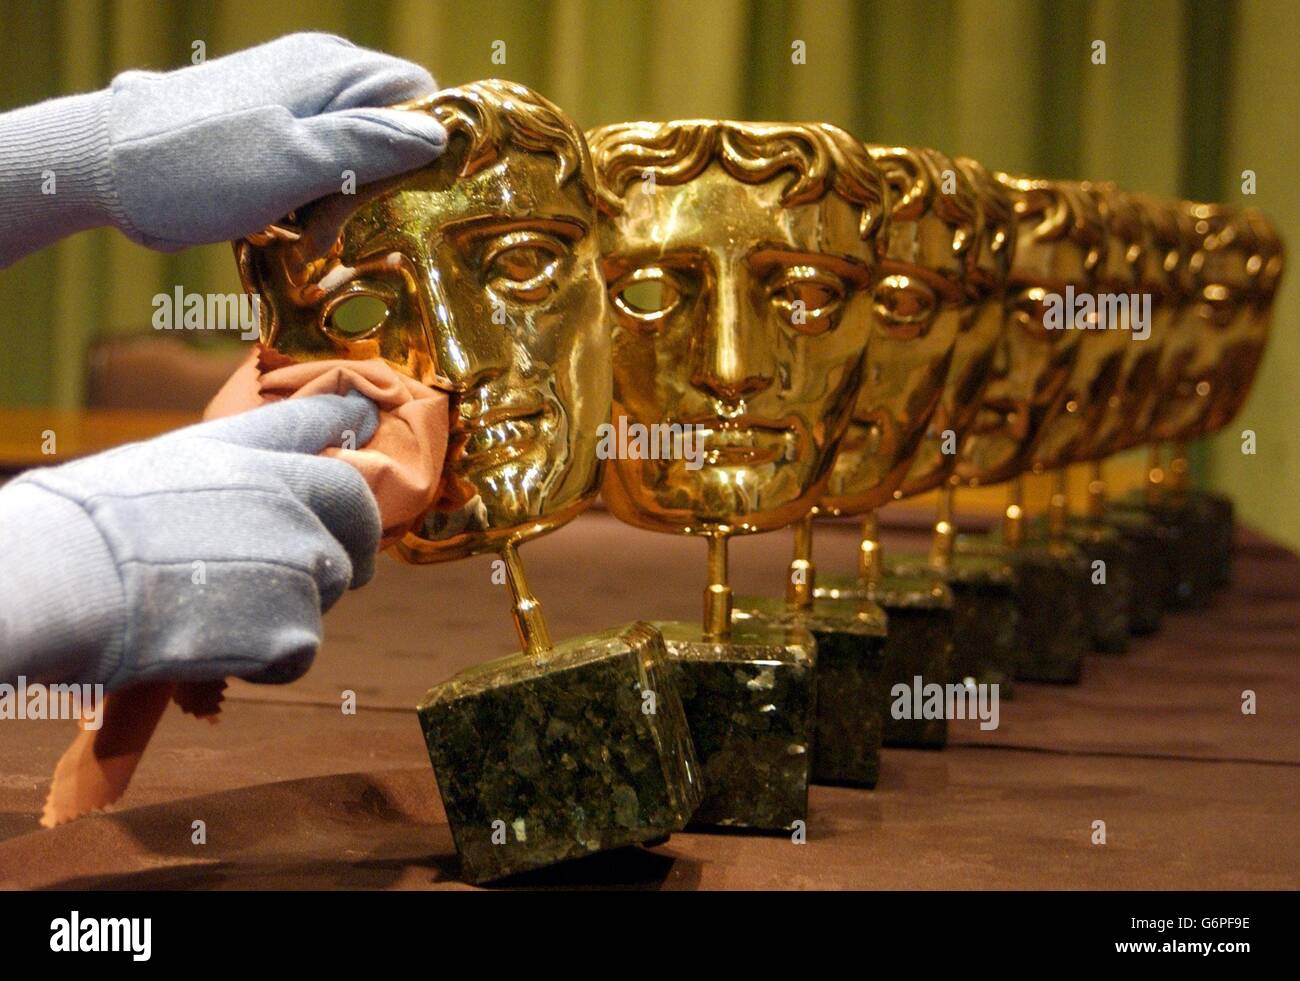 The Orange British Academy Film Awards are prepared at BAFTA headquarters in London's Piccadilly ahead of Sunday's awards ceremony at Odeon Leicester Square. Stock Photo